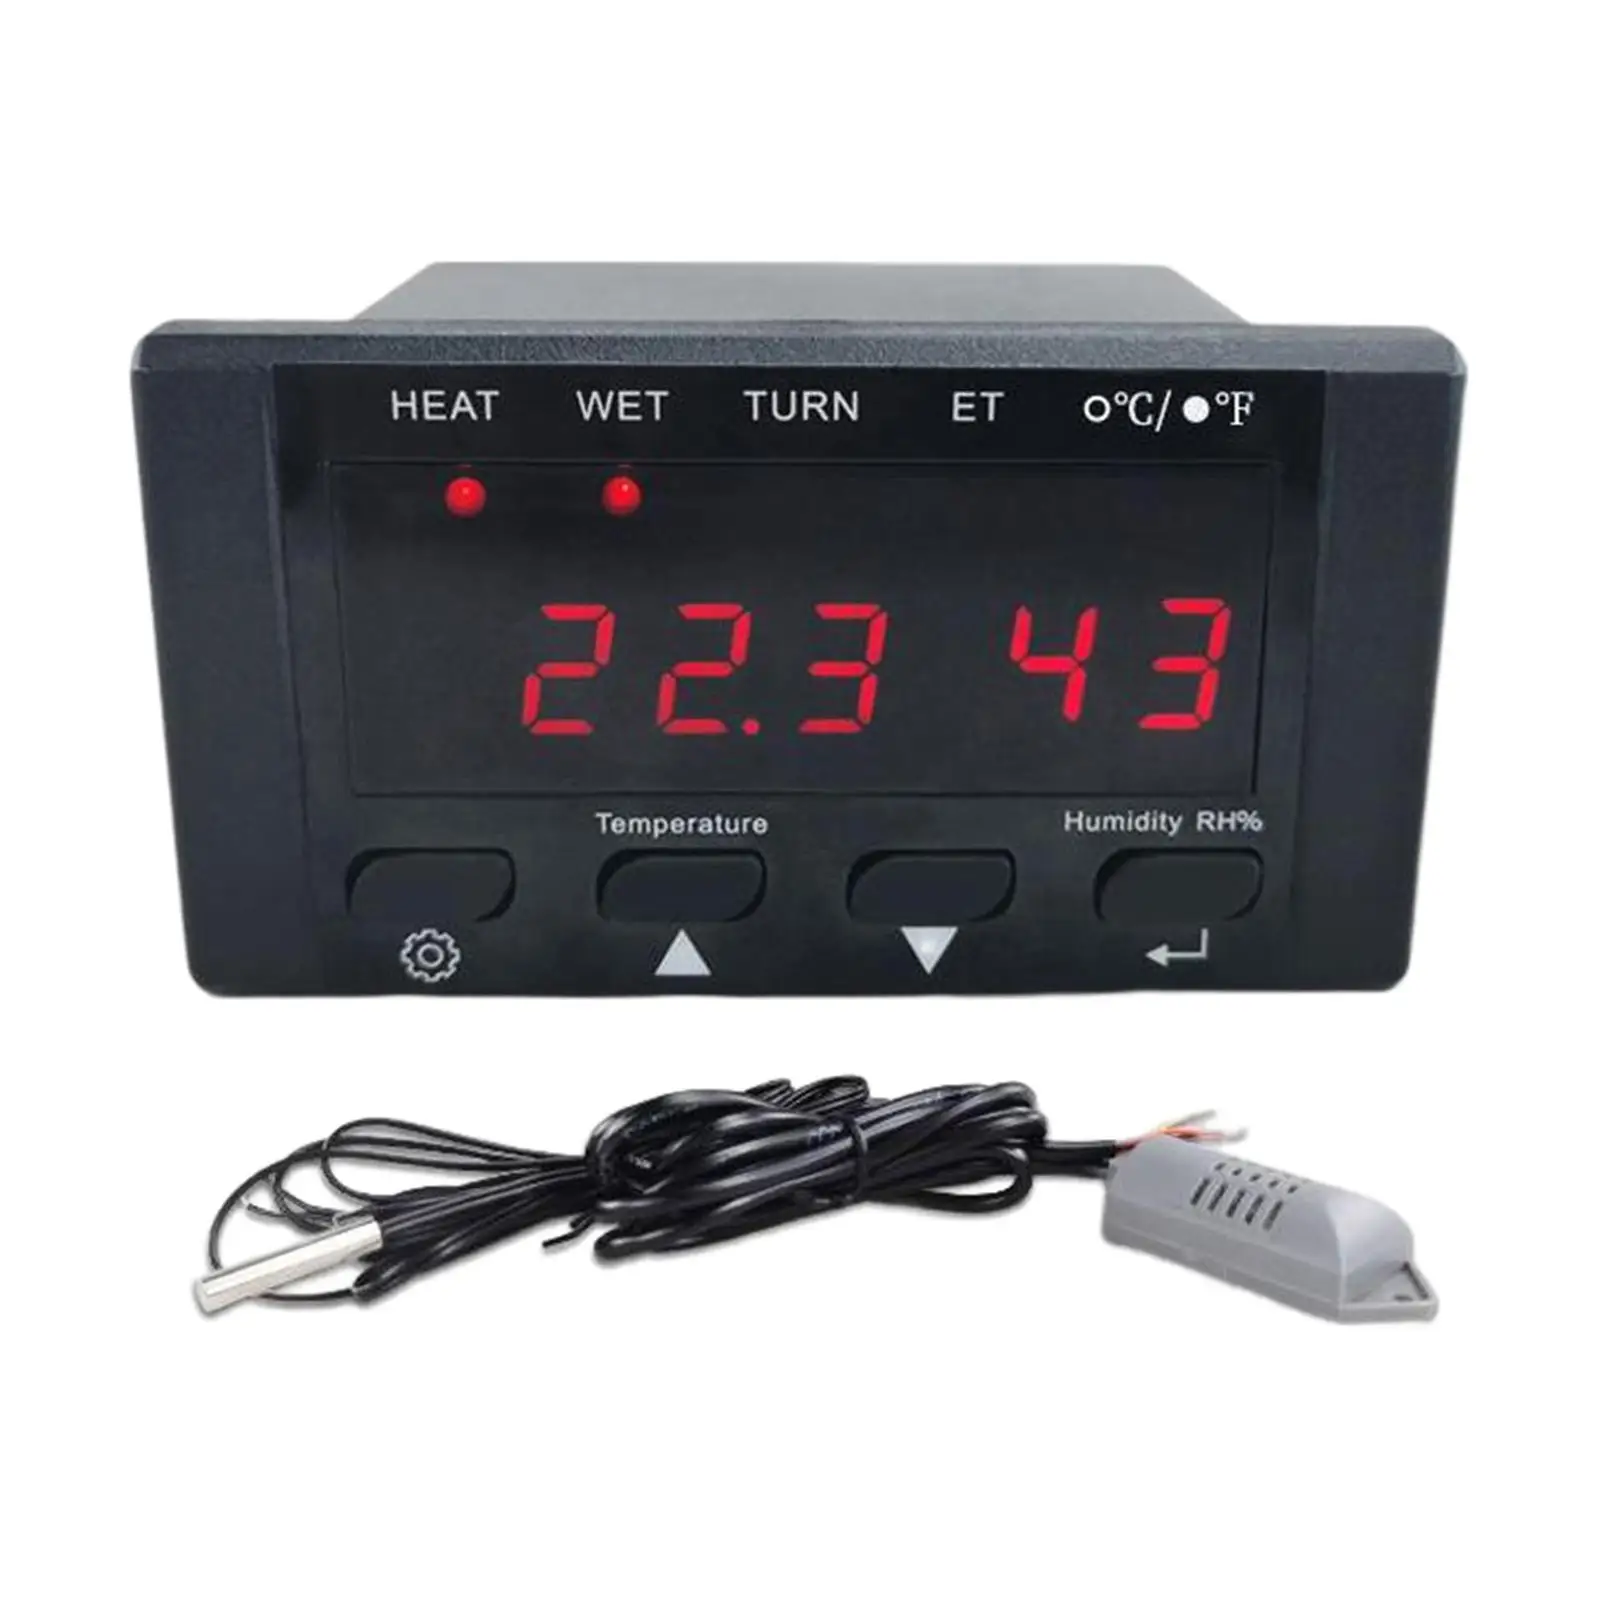 HT-10 Incubator Controller Thermostat Hygrostat with Temperature Humidity Sensor Prob Over Limit Alarm for Egg Hatching Duck Egg